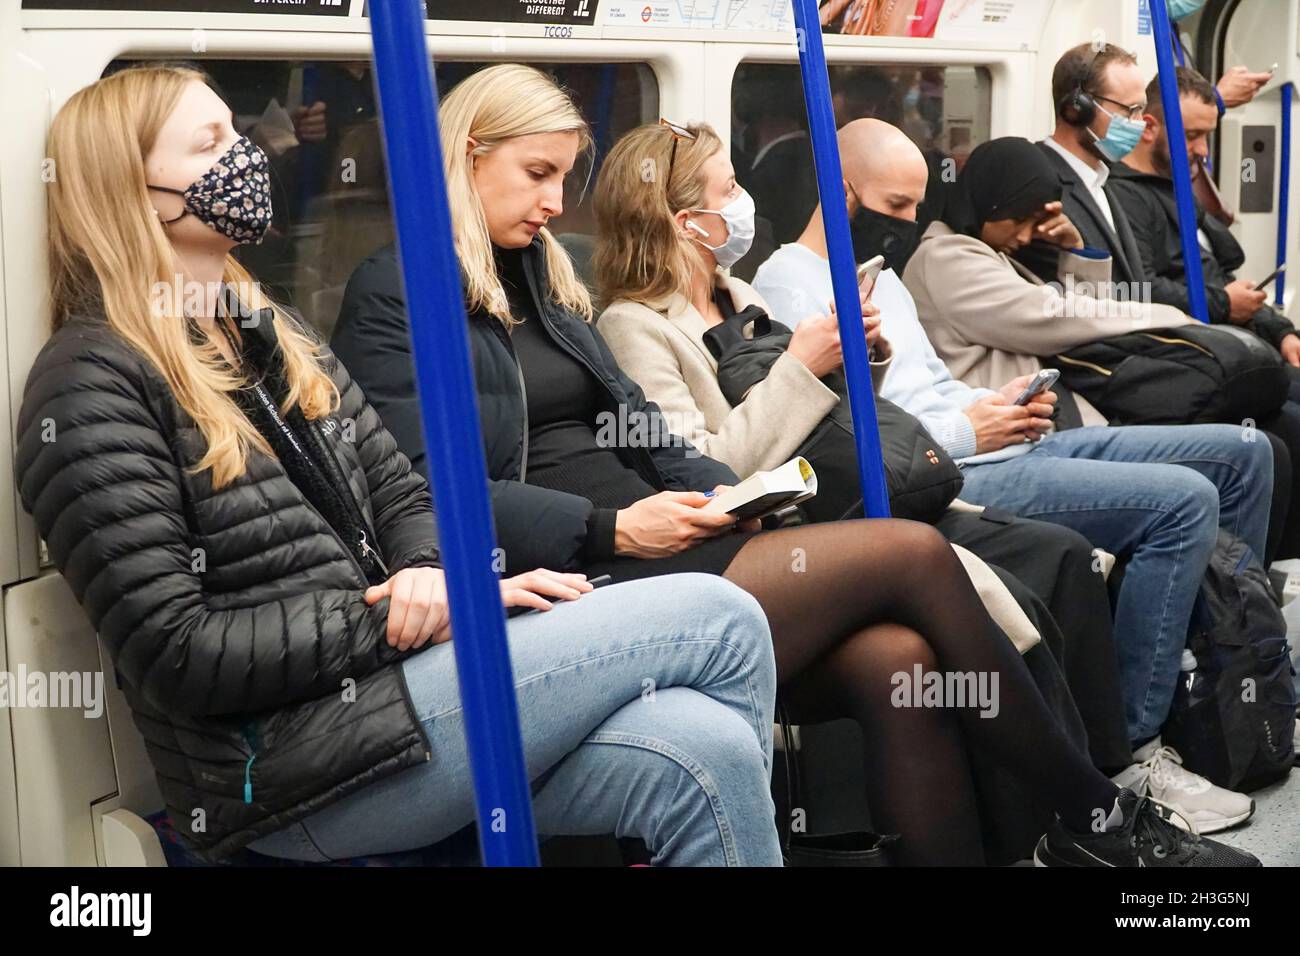 London, UK, 28 October 2021: On the London Underground some people wear face masks but not all do. Although a mask is not required if a person has a medical exemption, large numbers of passengers are travelling without masks despite very high levels of coronavirus transmission and new covid-19 cases. Anna Watson/Alamy Live News Stock Photo